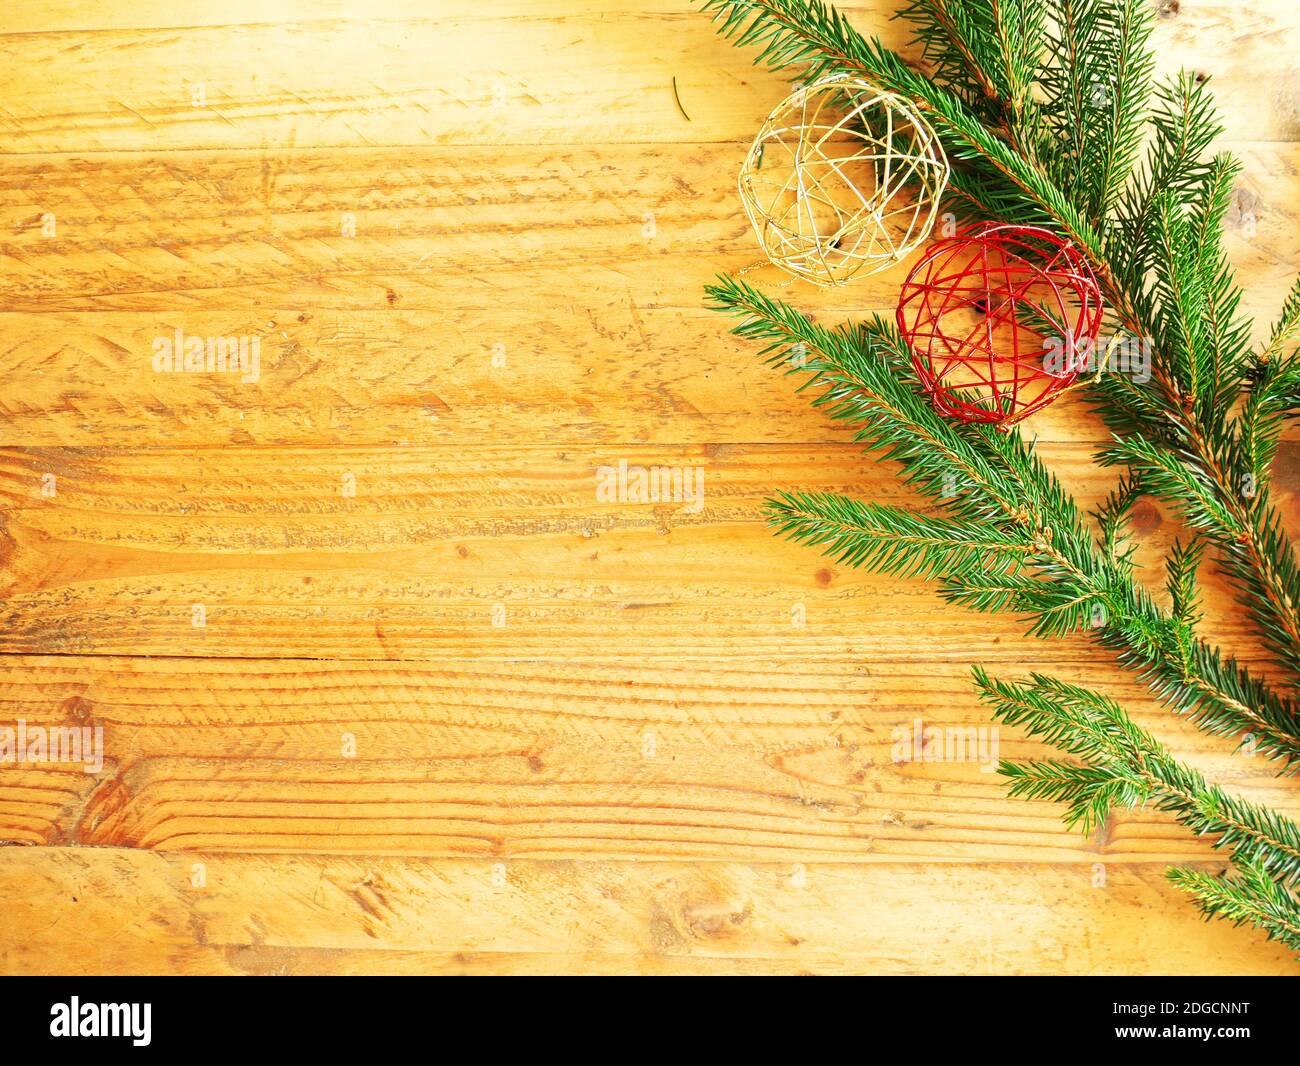 Wooden Christmas background with a fir branch and Christmas baubles Stock Photo